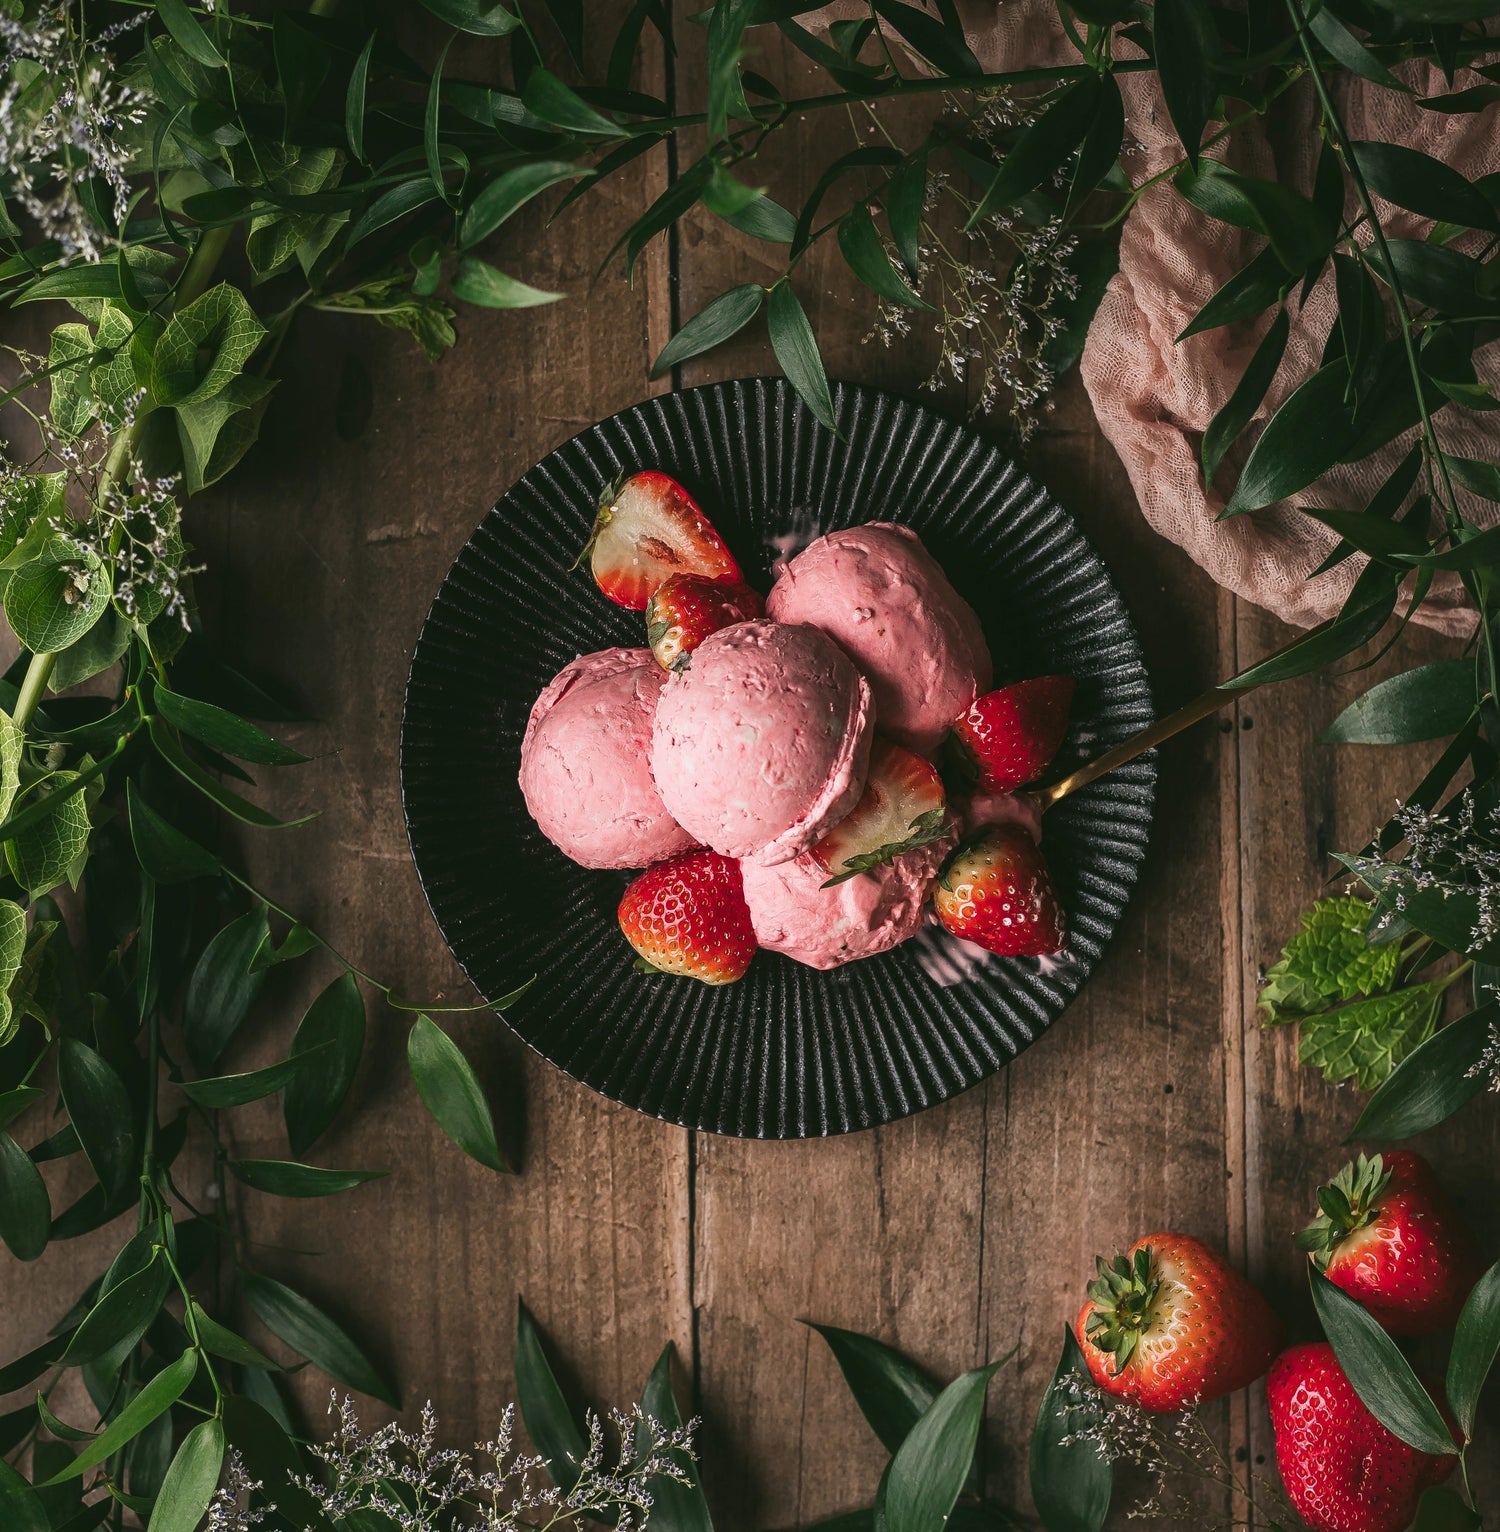 Plant based strawberry ice cream with strawberry garnish surrounded by greenery on picnic table